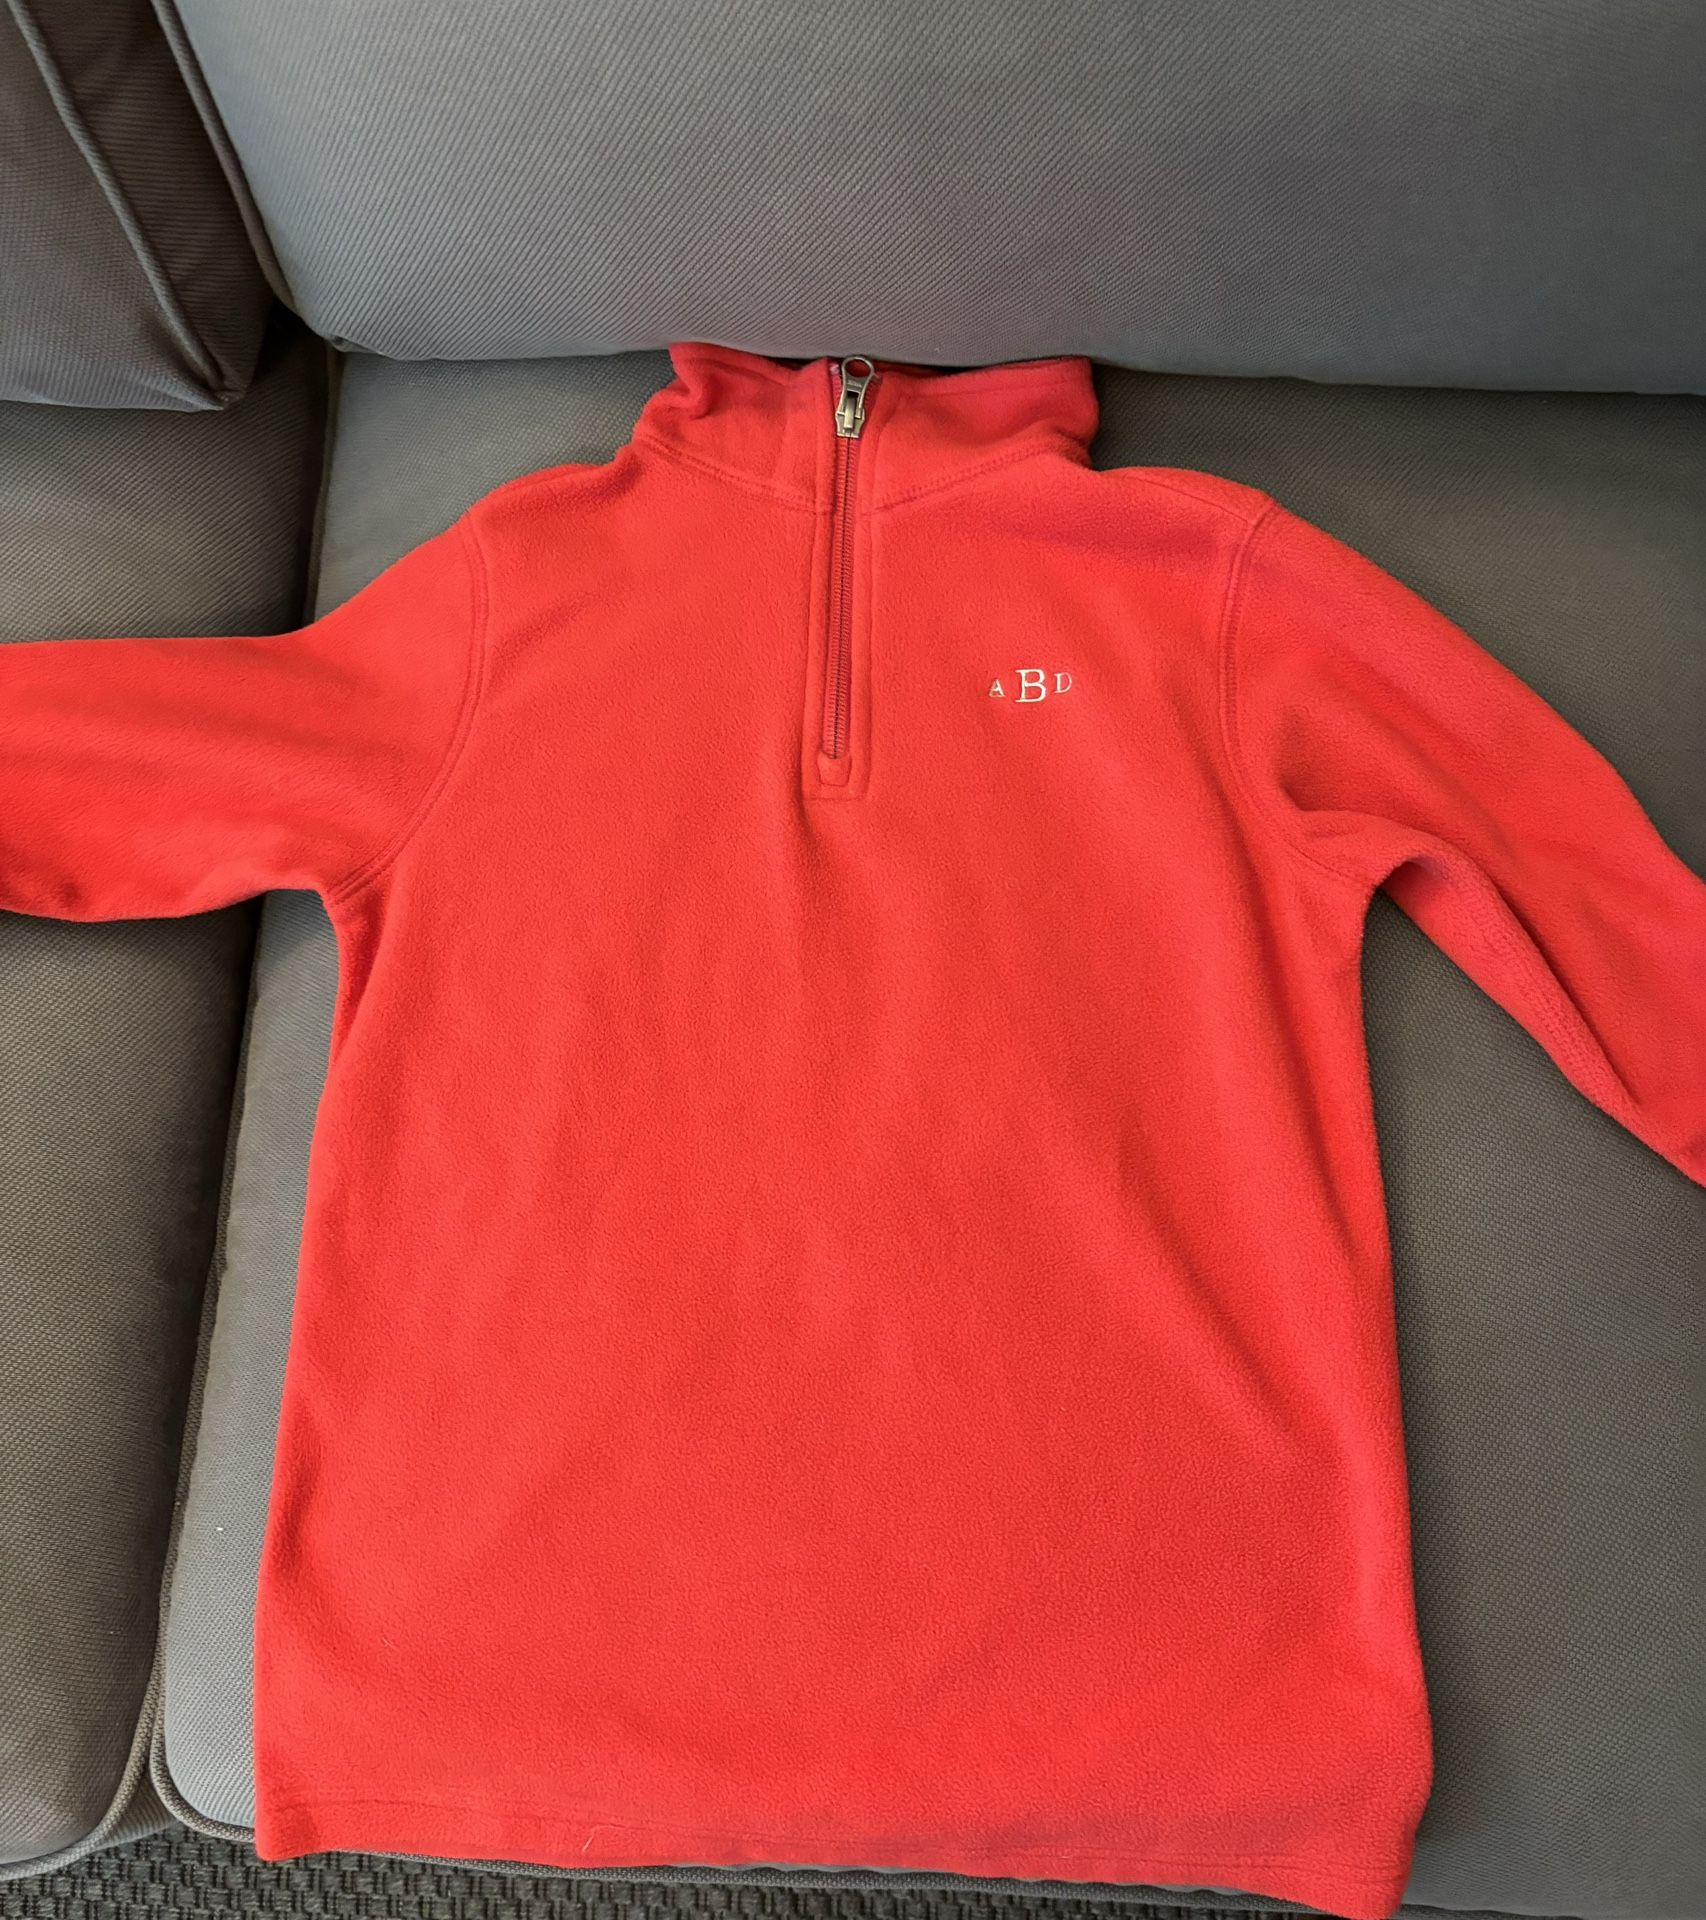 Lands End Girls Red 1/4 Zip Up Fleece Sweater - Size Small (8) Excellent Condition 